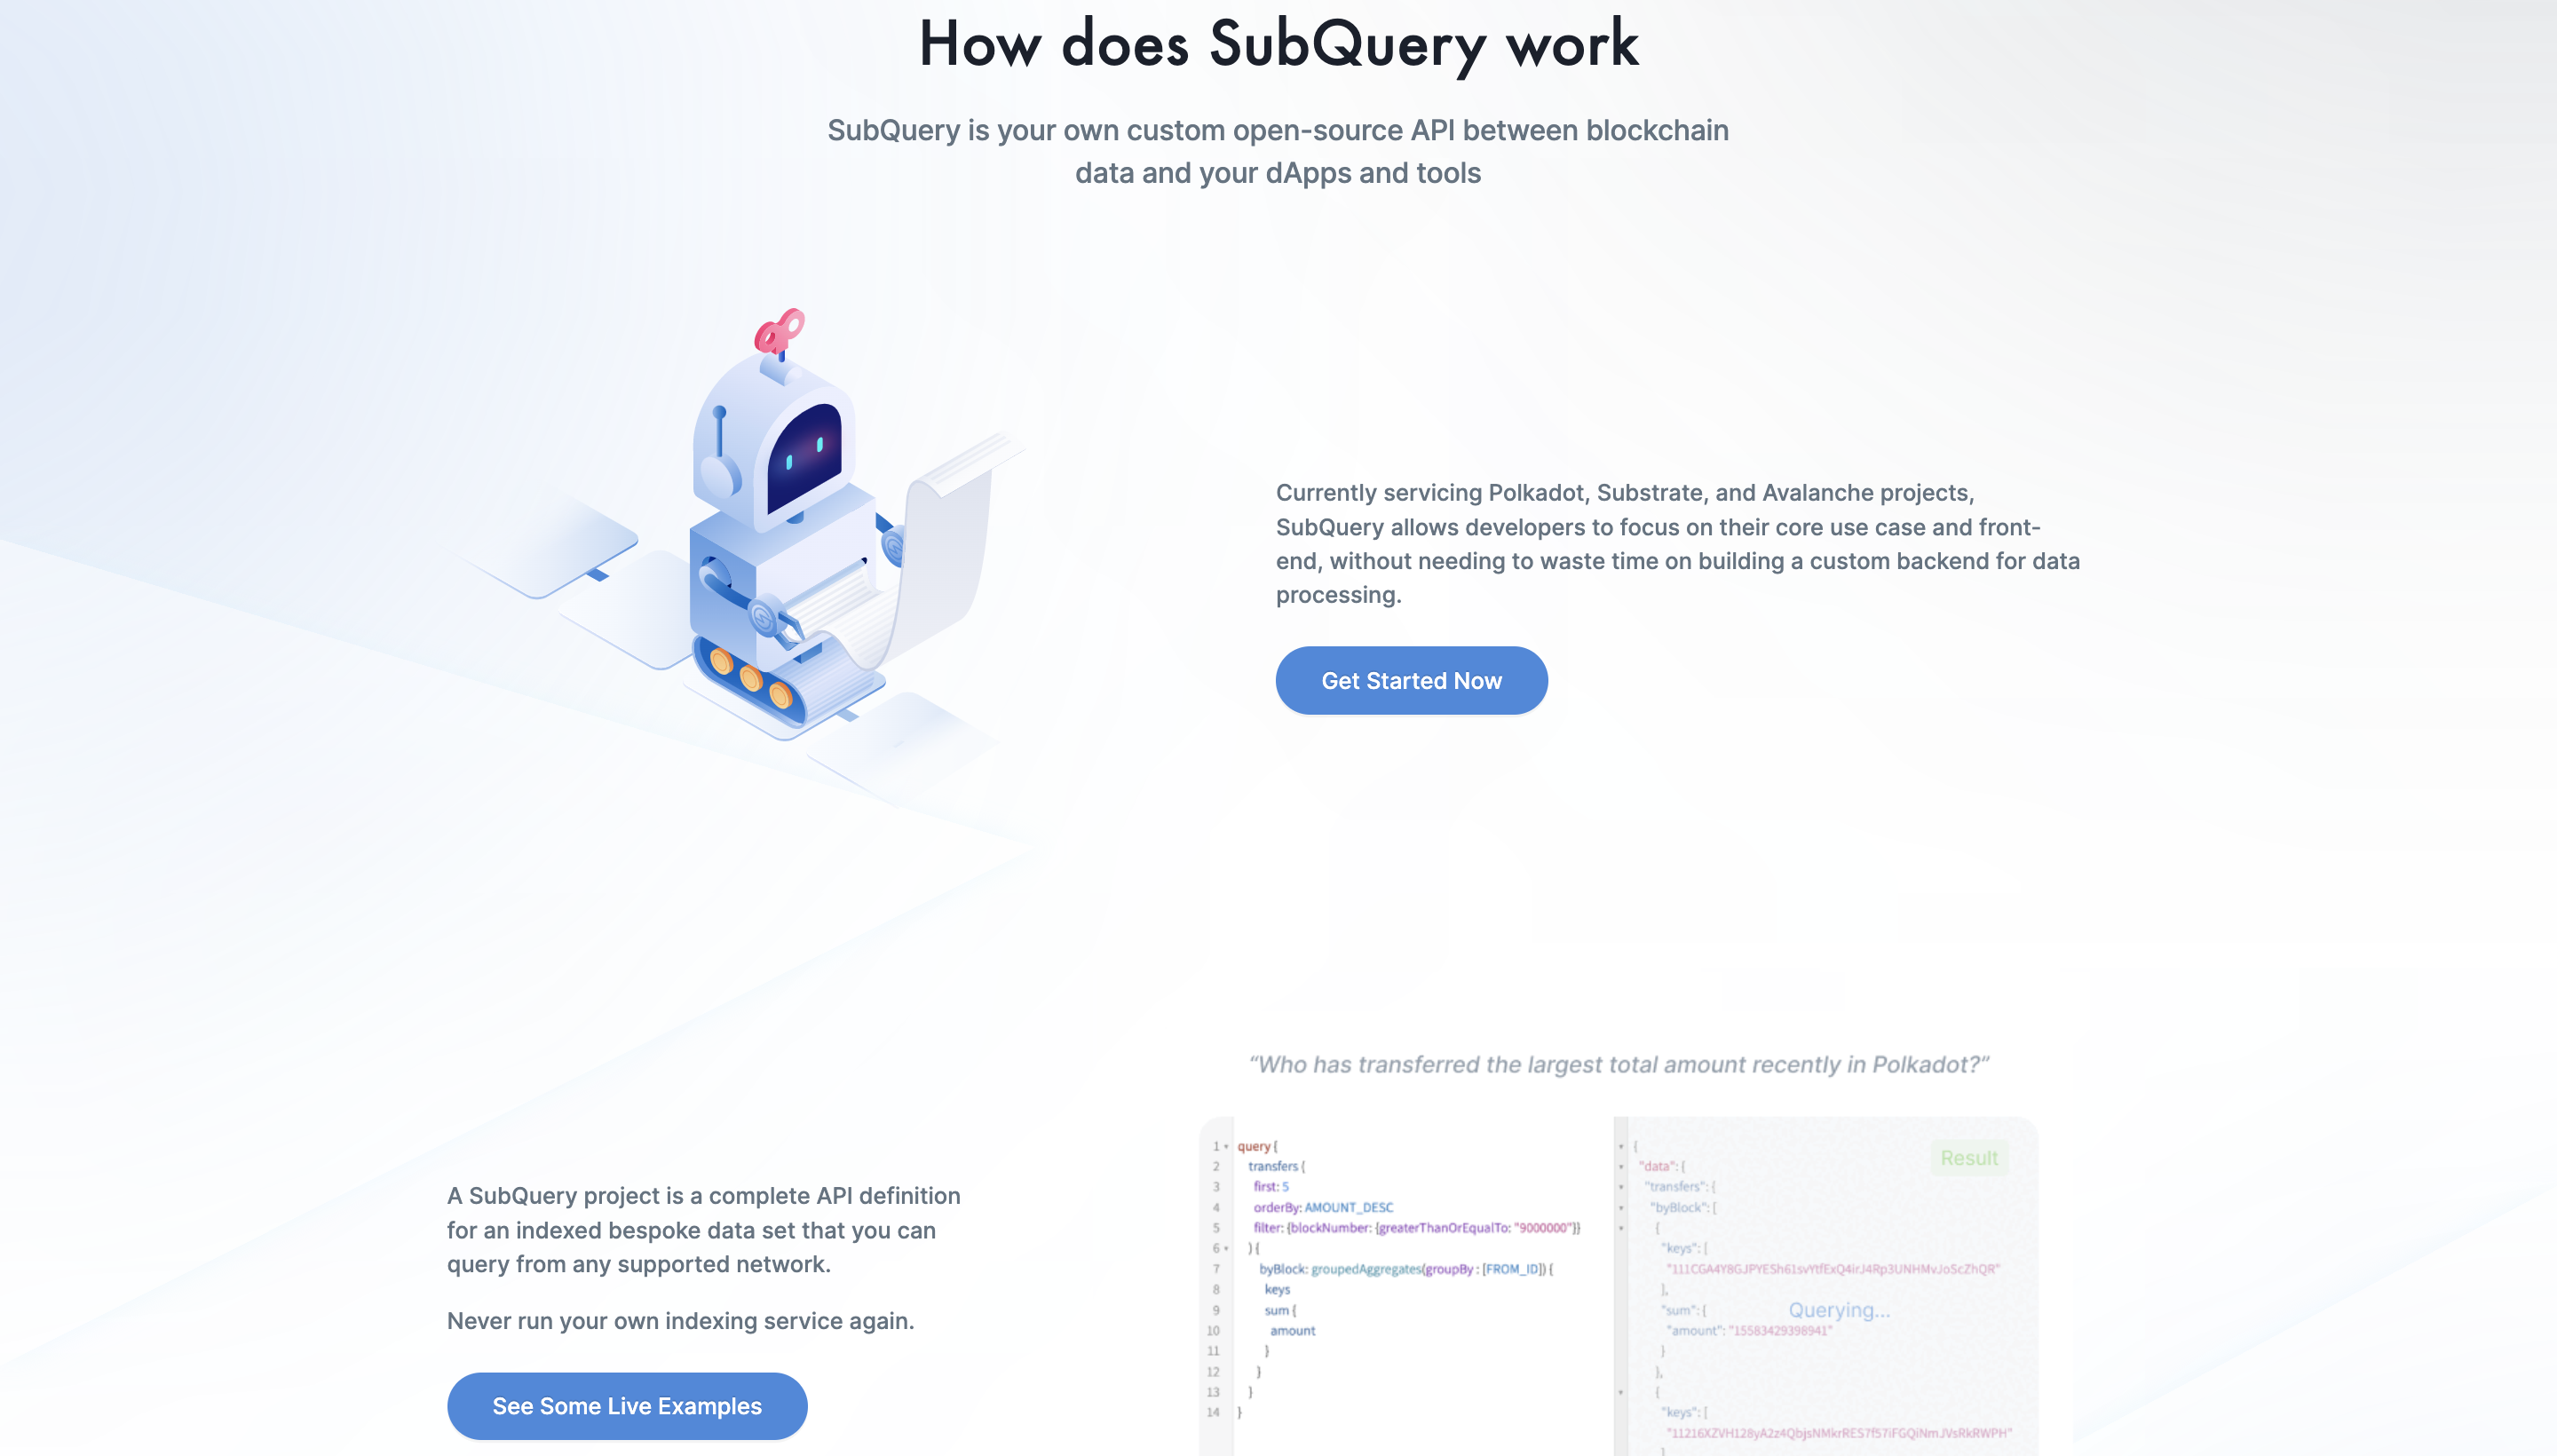 SubQuery Network How It Works